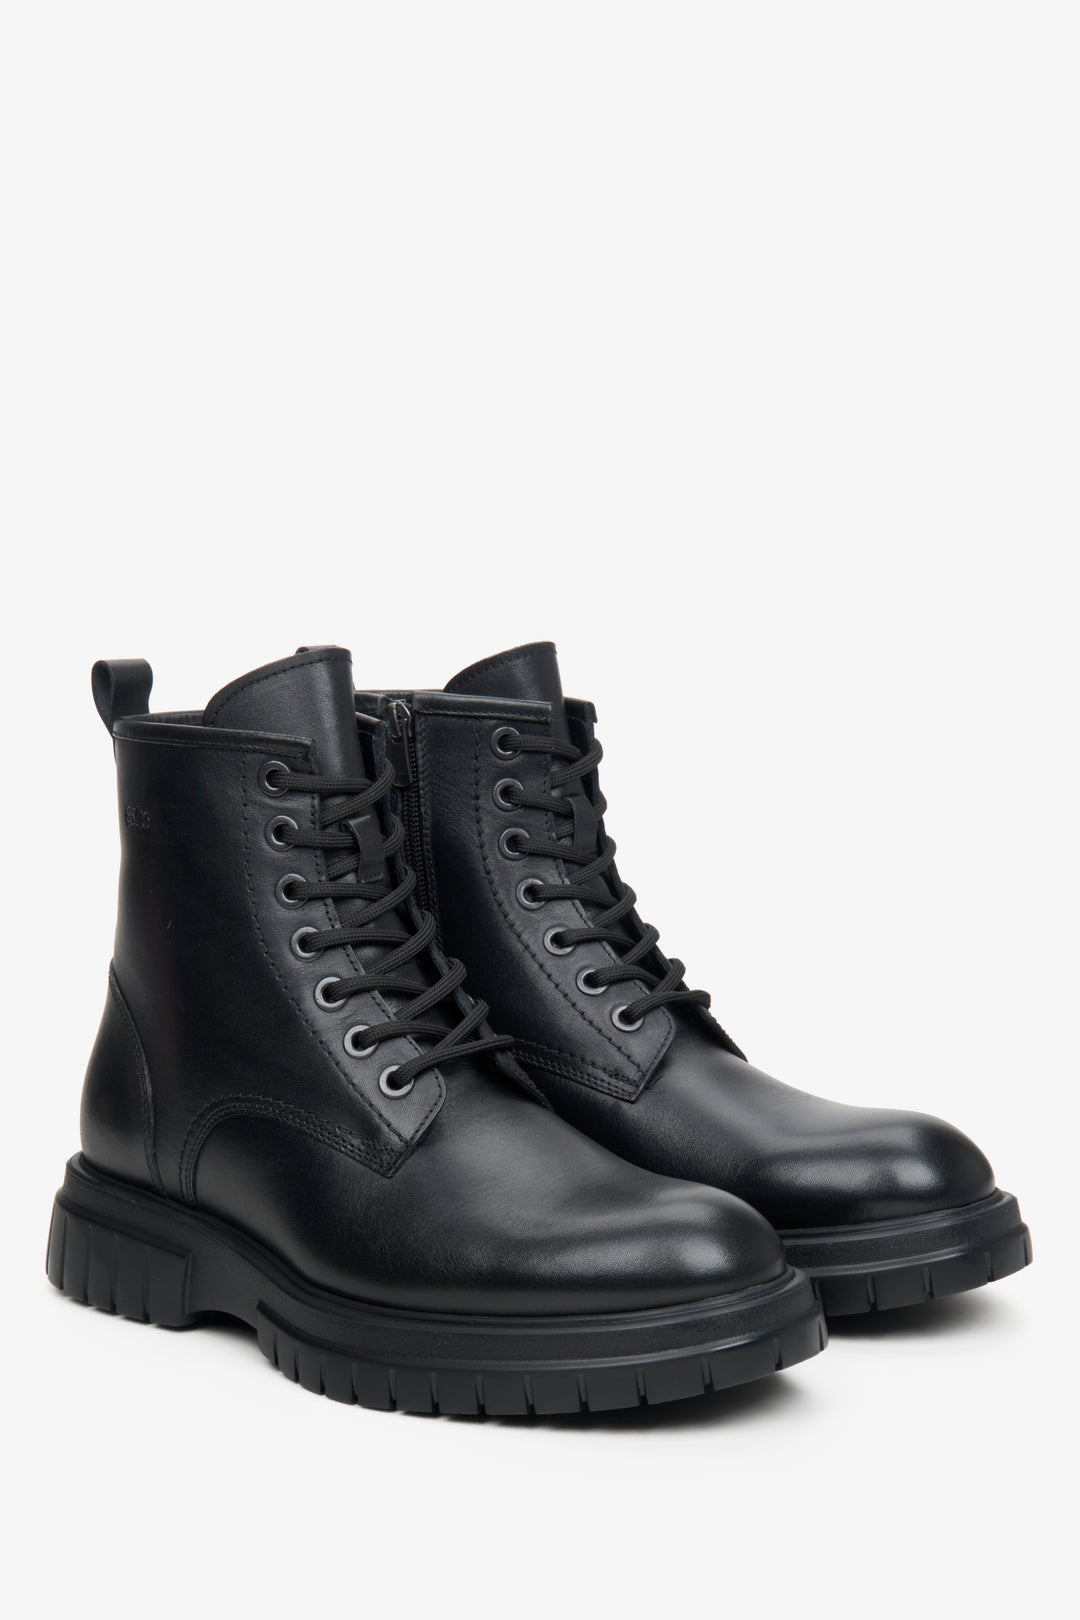 Men's black Estro  ankle boot made of genuine leather.